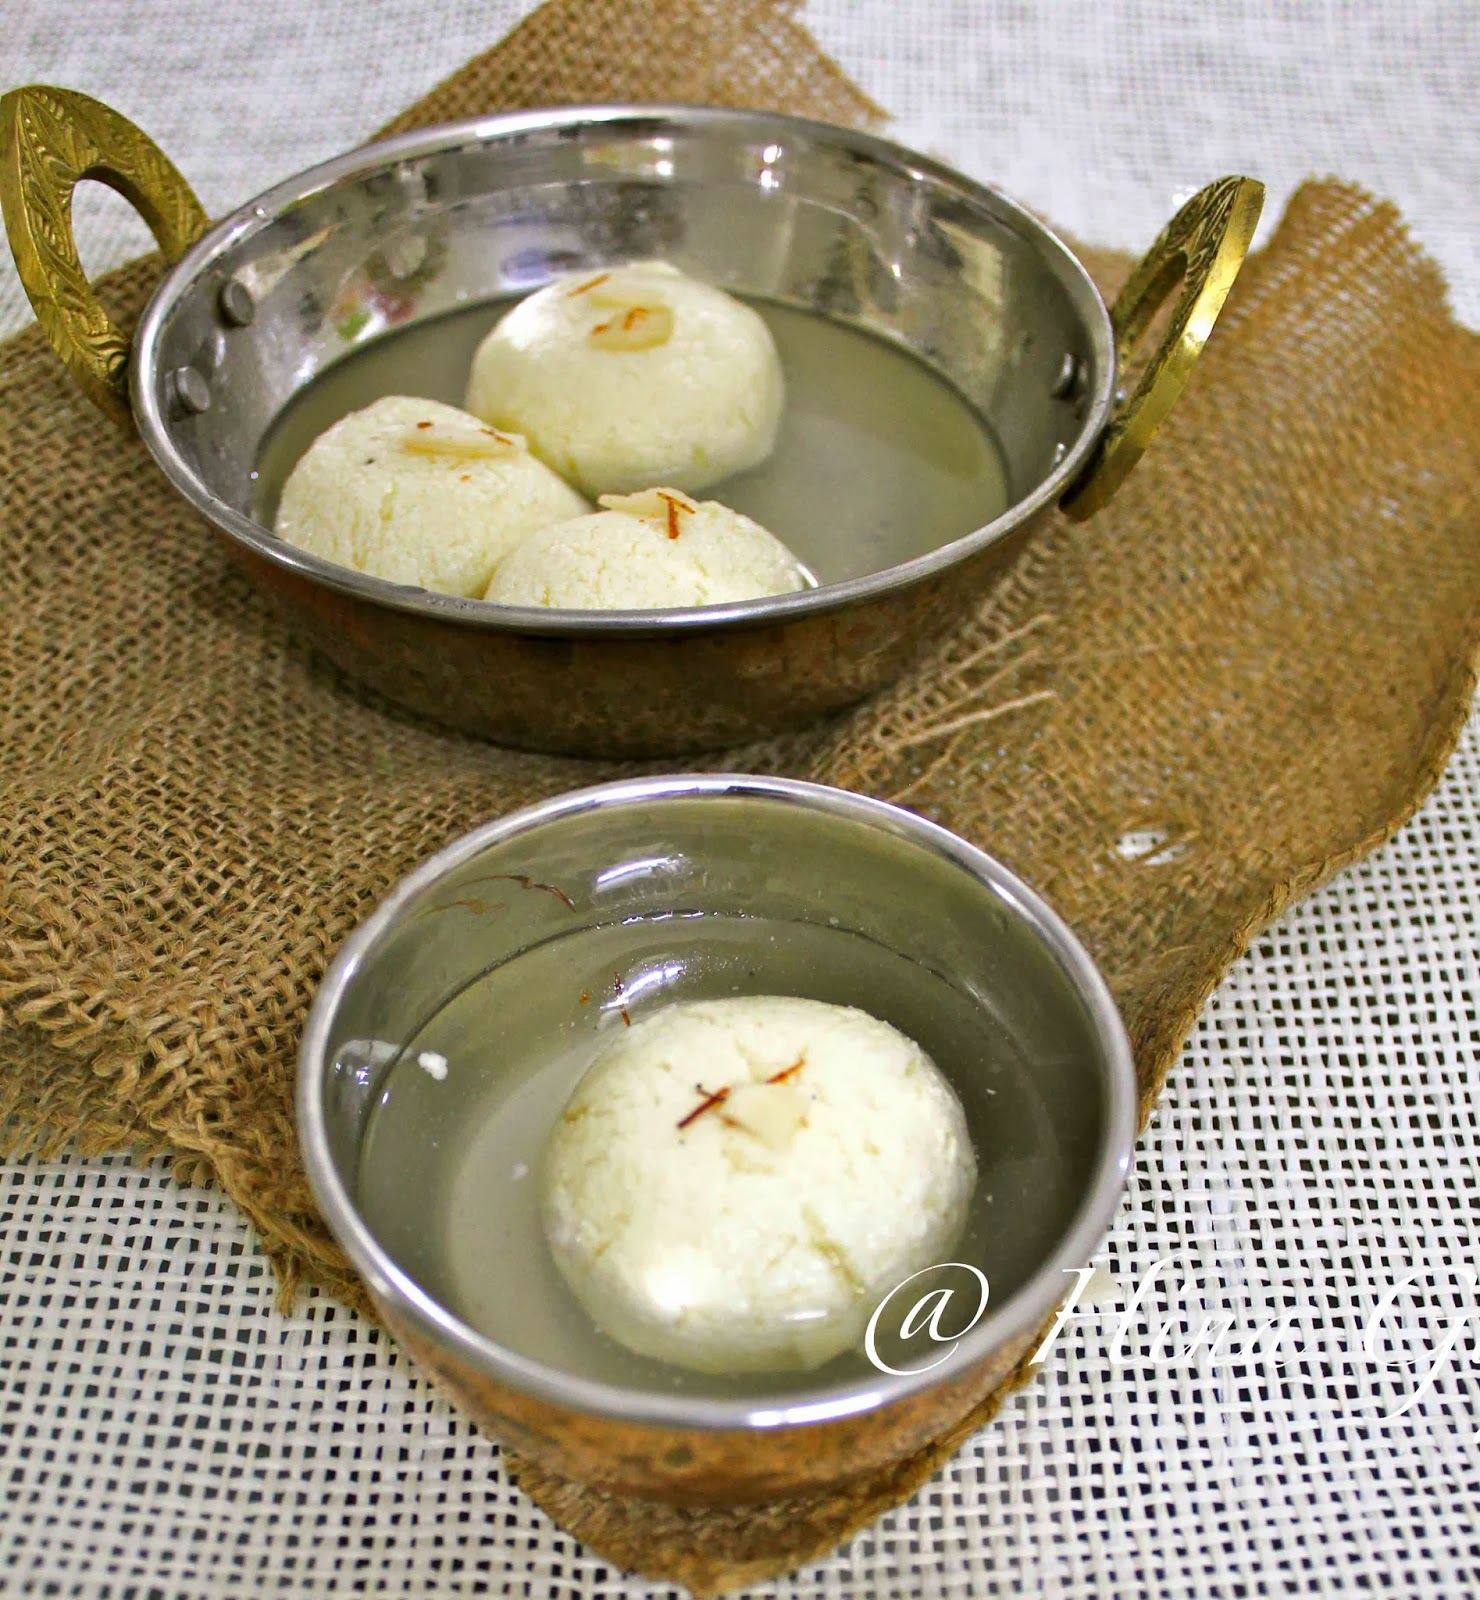 Rasgulla is a delicious Indian dessert prepared from cottage cheese. Find how to make rasgulla at home in few simple steps